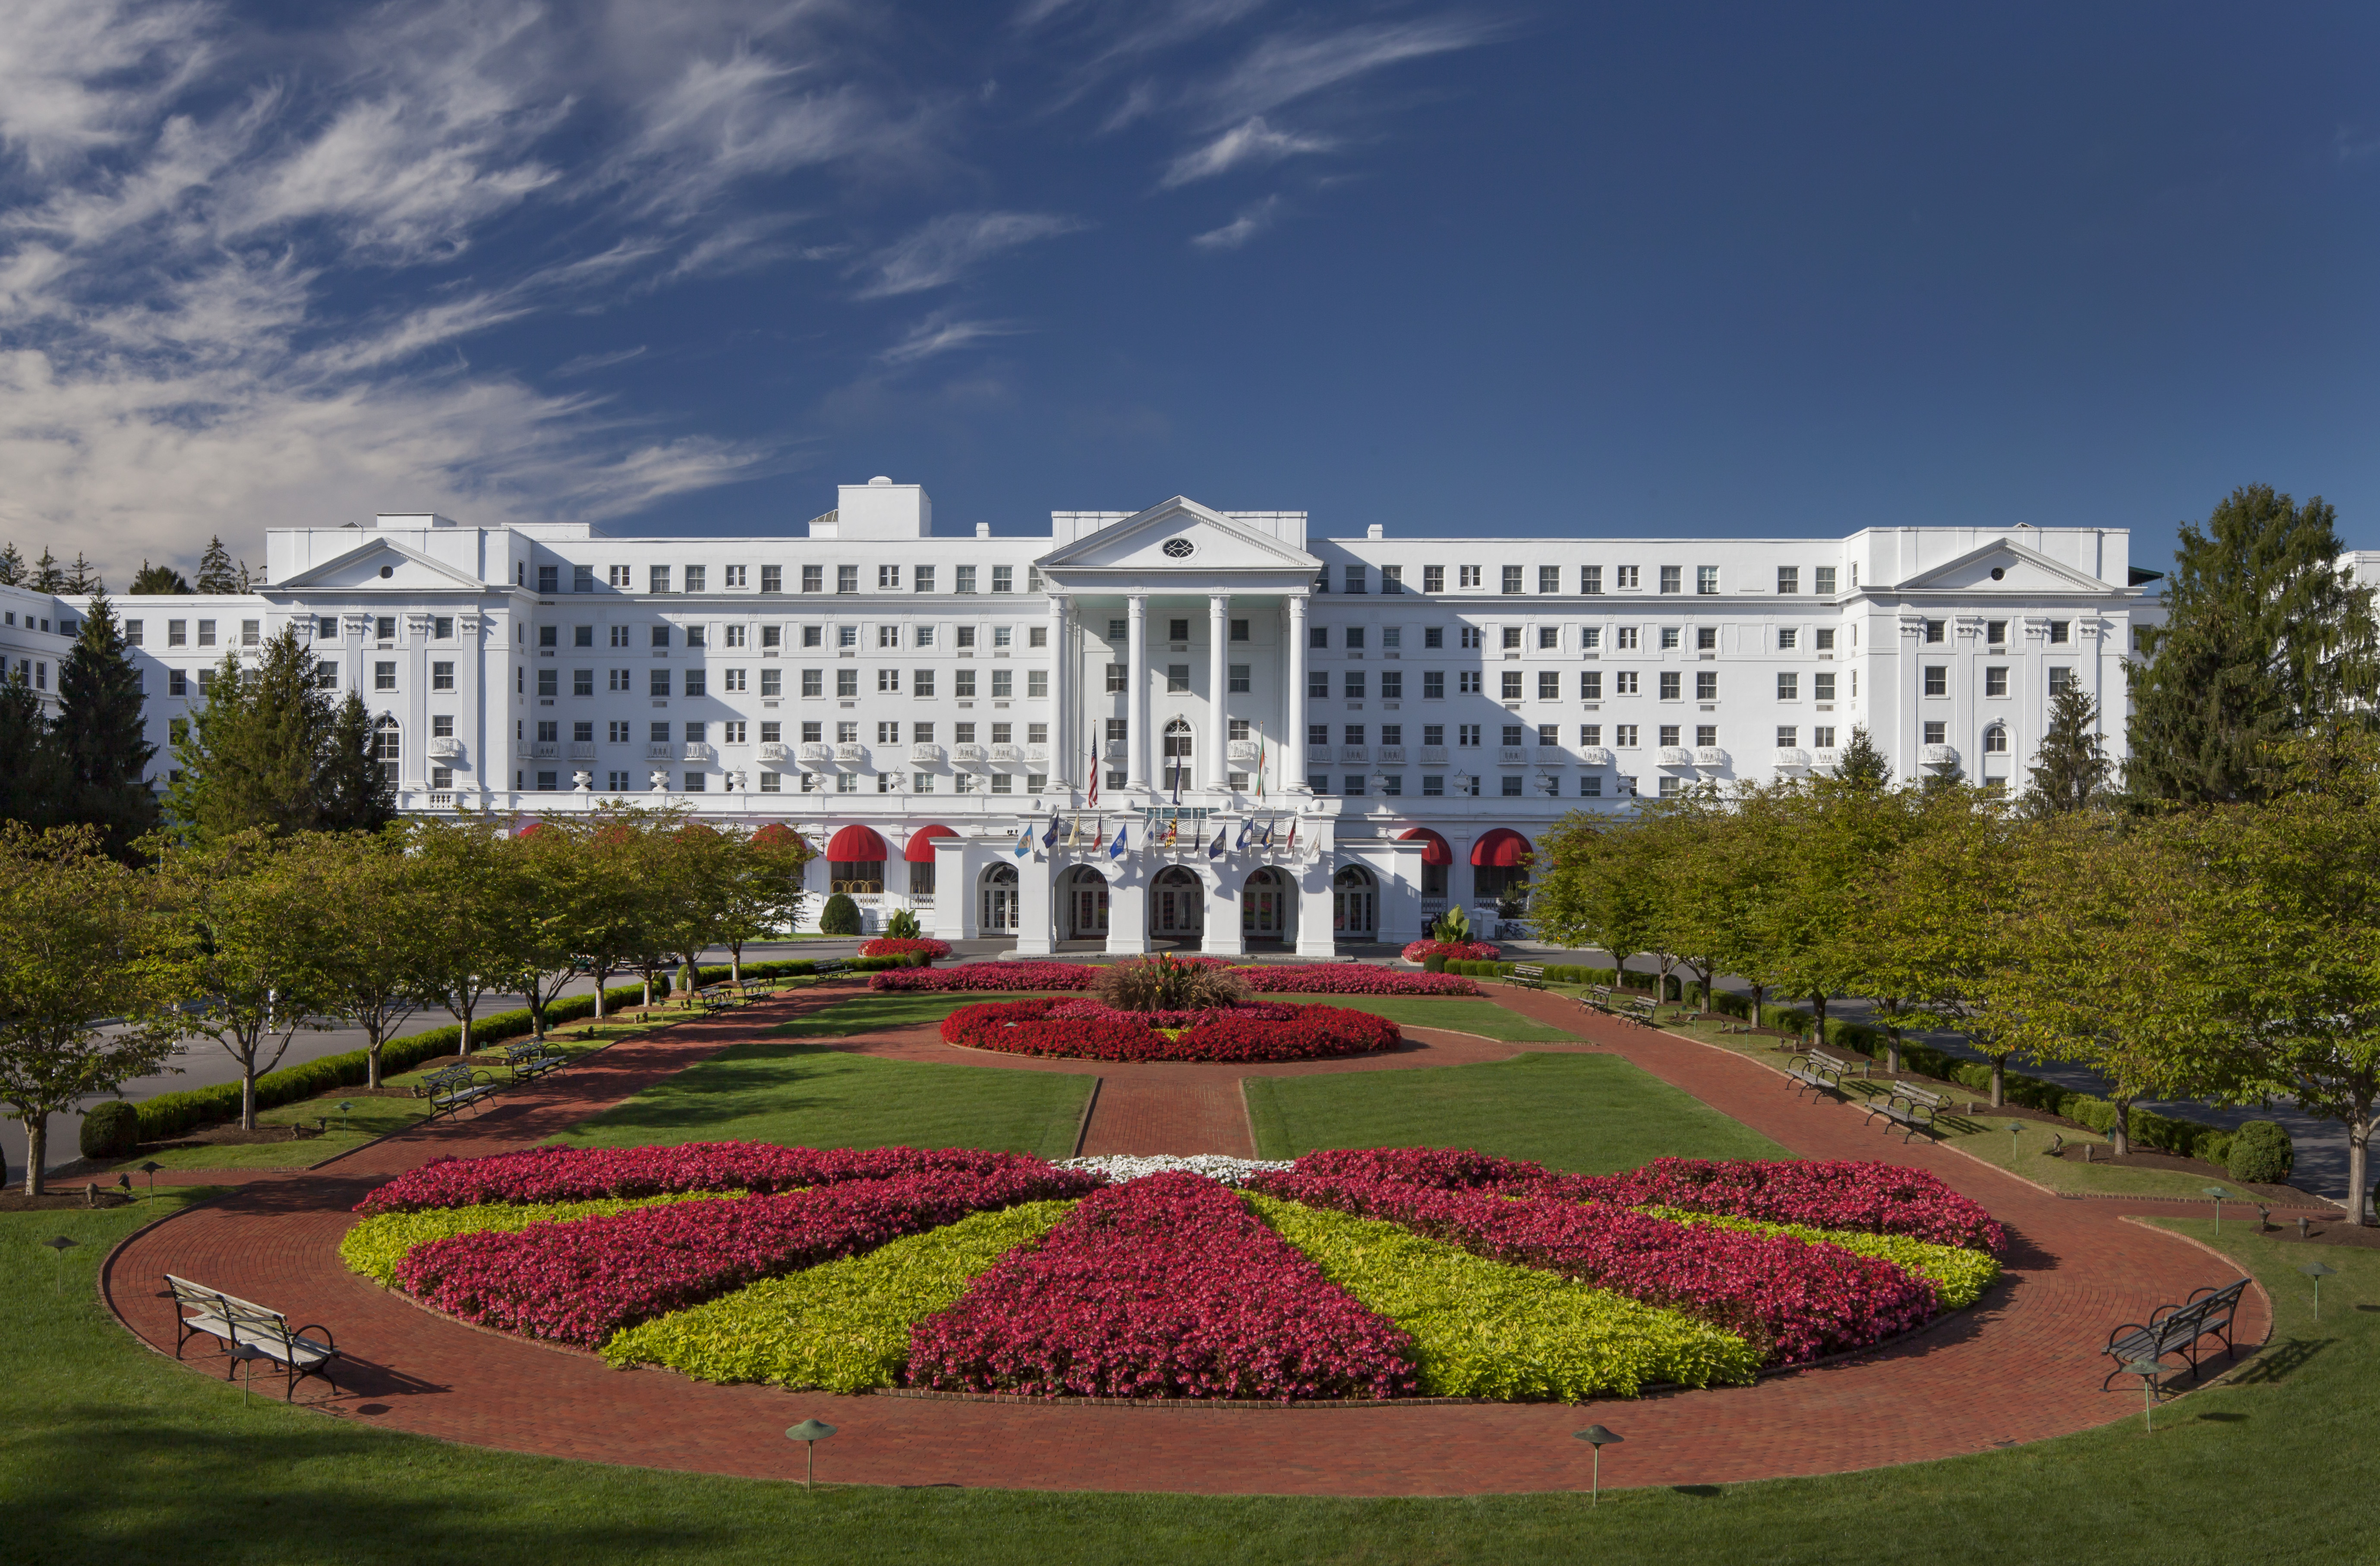 Front entrance of the Greenbrier hotel in West Virginia